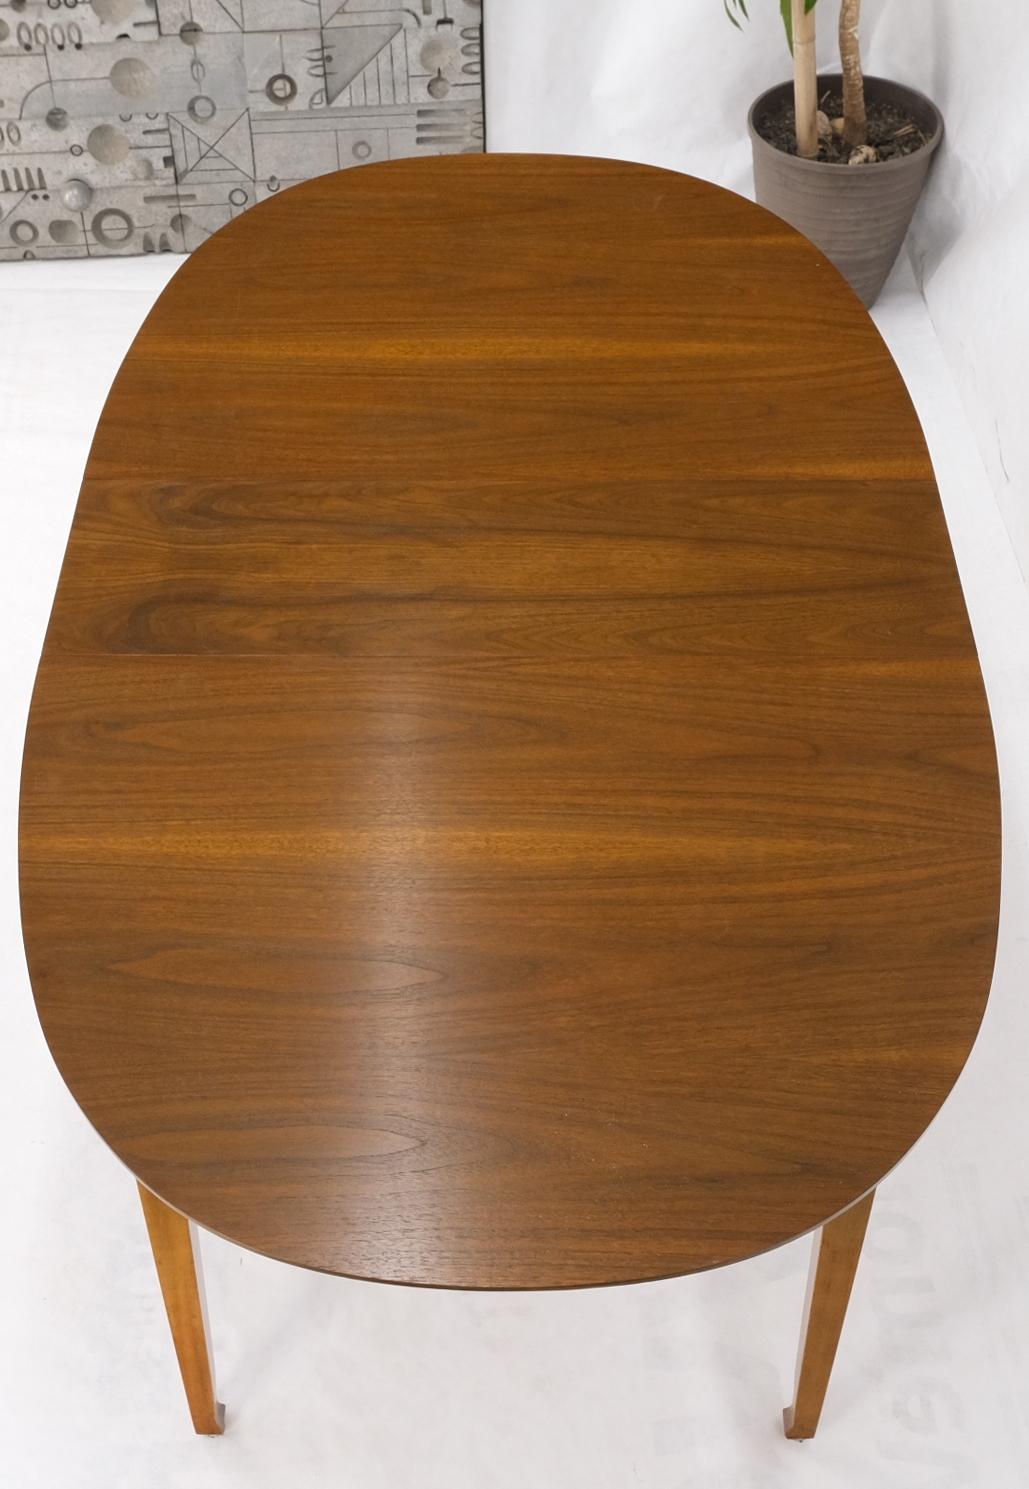 Oval Walnut Square Tapered Legs Mid Century Modern Dining Conference Table Mint For Sale 5